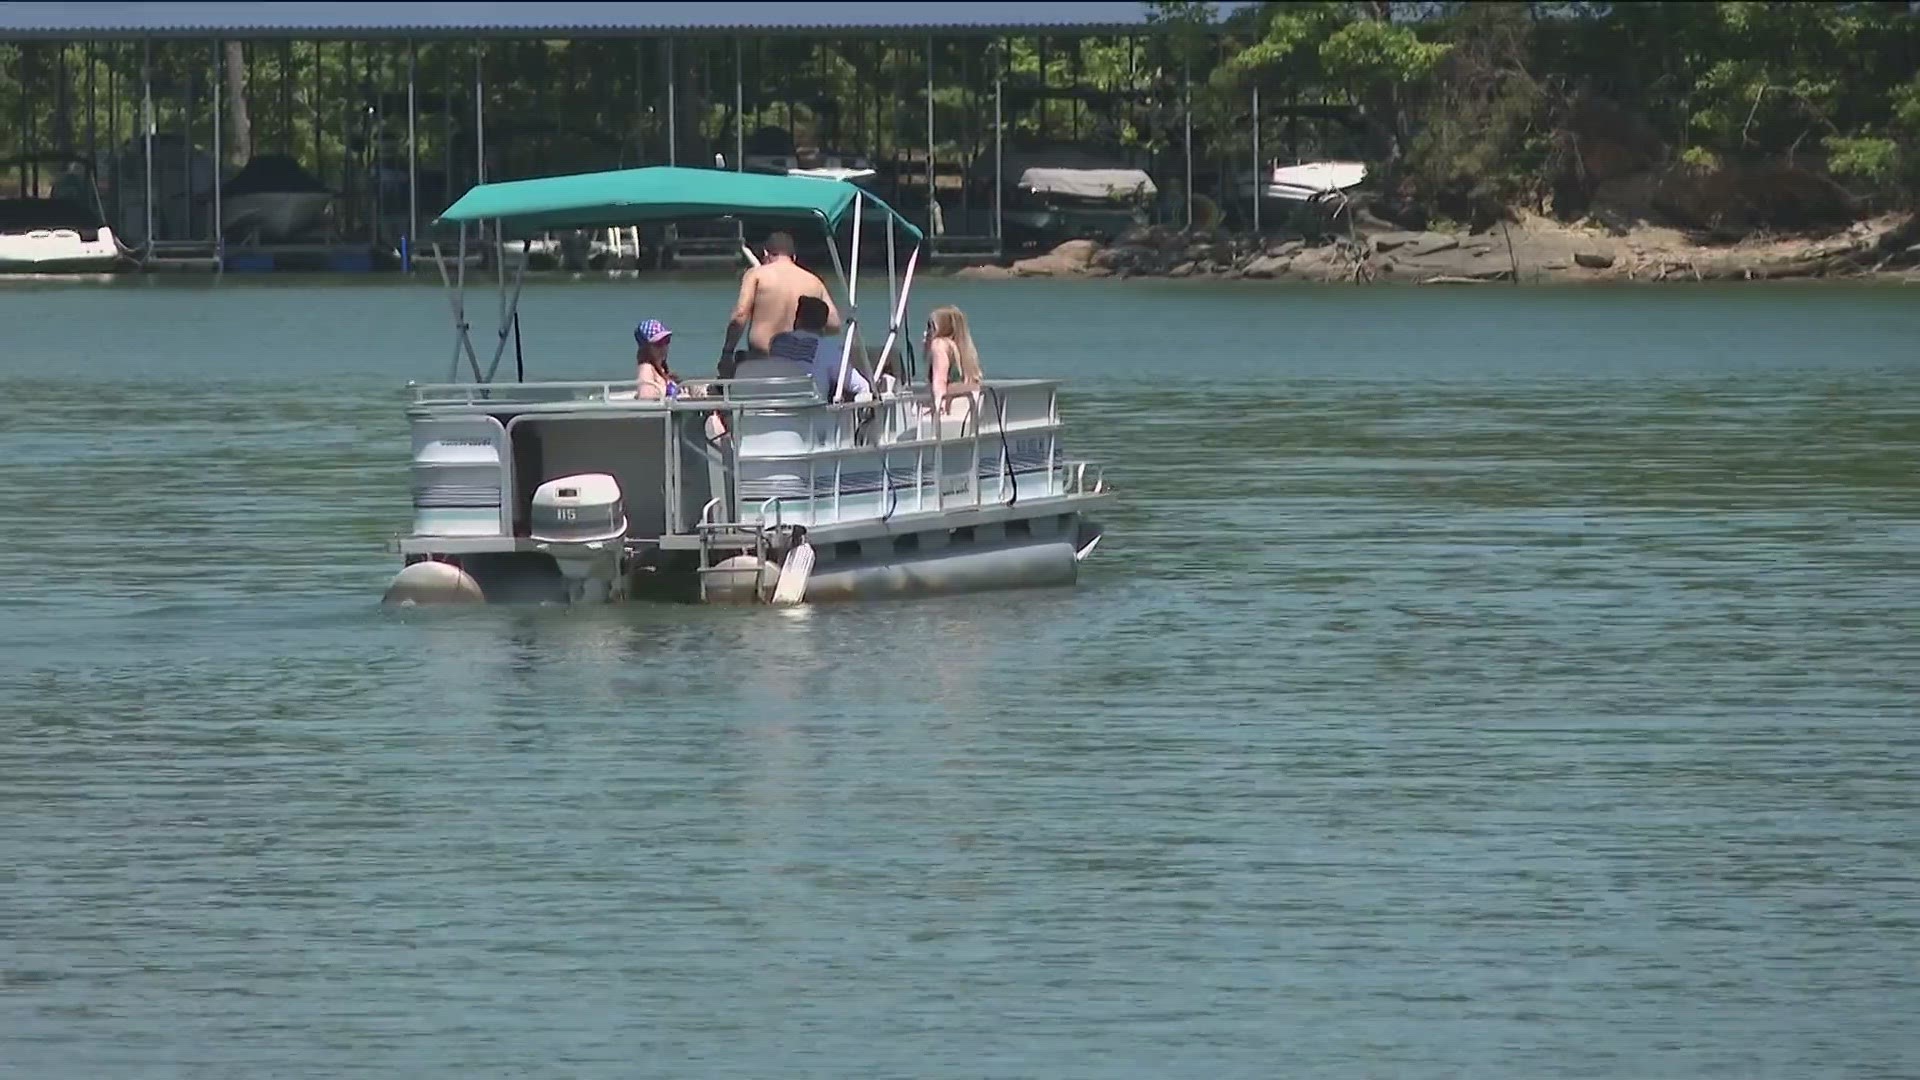 The DNR is patrolling different waterways across the state and keeps seeing the same laws being broken.